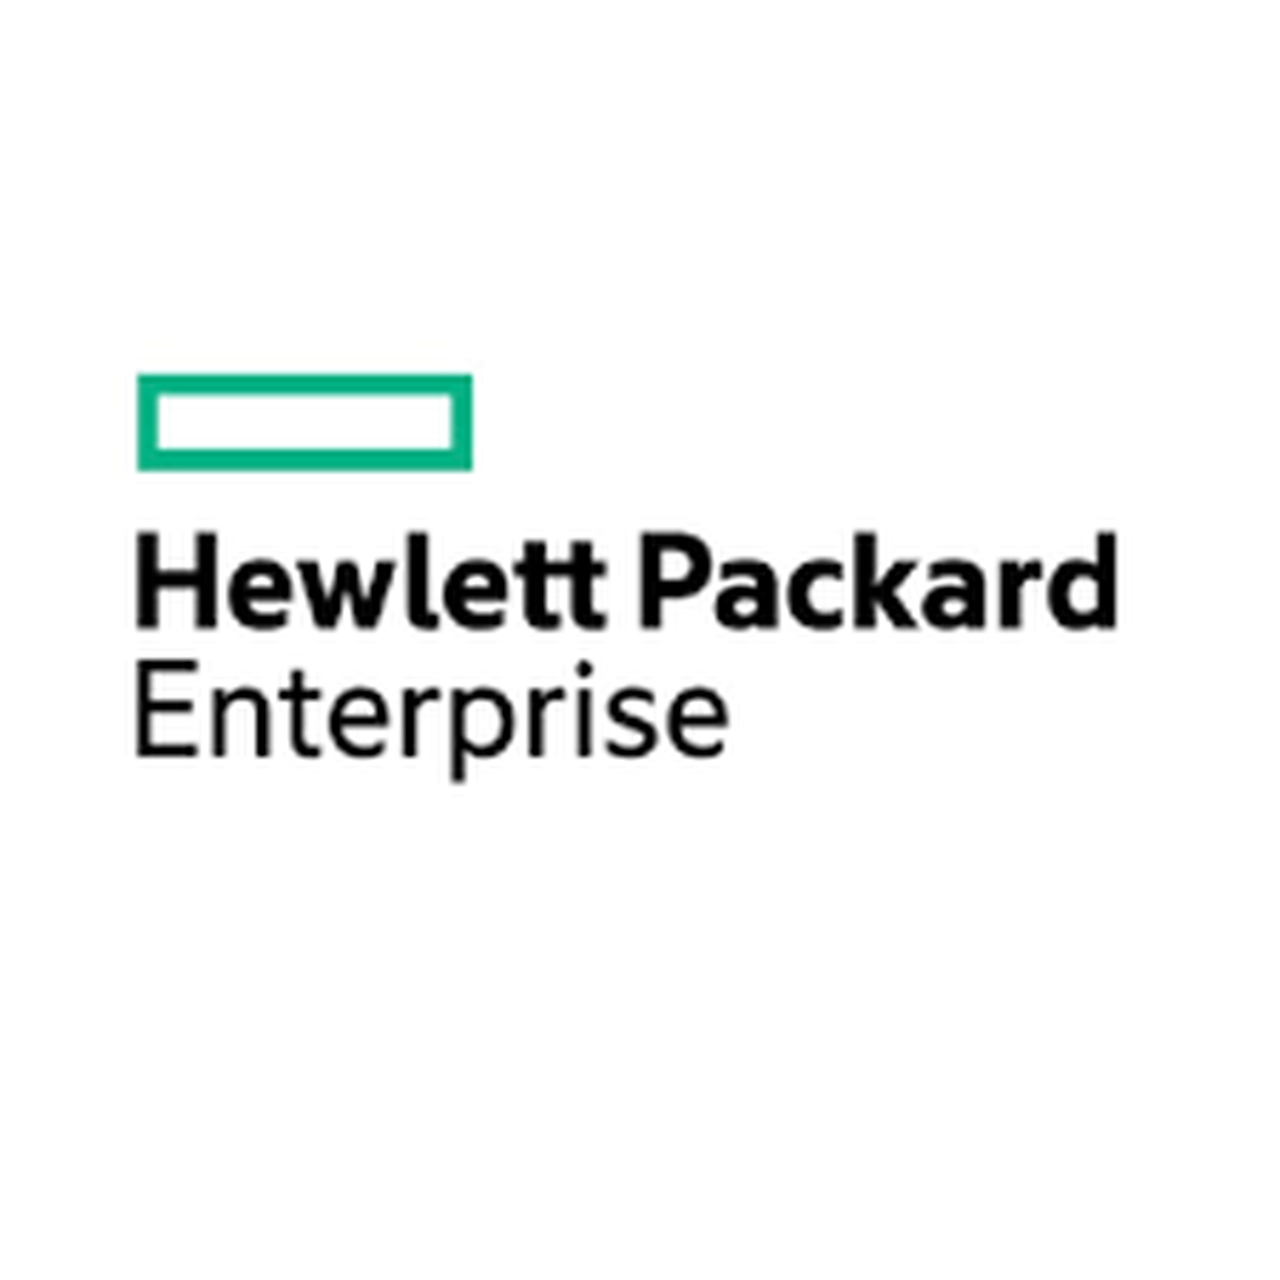 HPE DECforms RunTime VMS I64 License